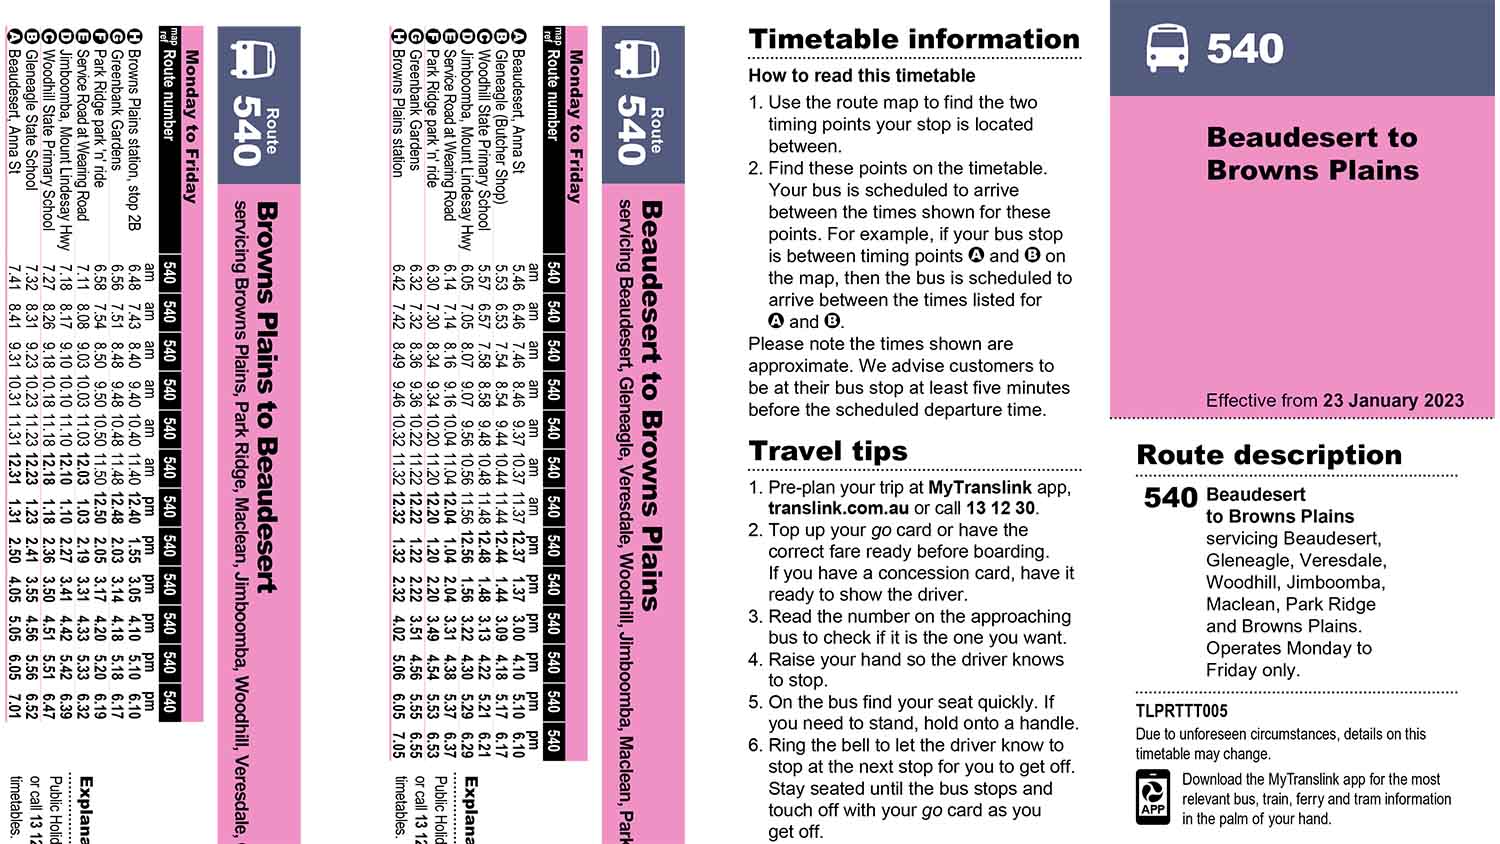 Example of Translink timetable for the area